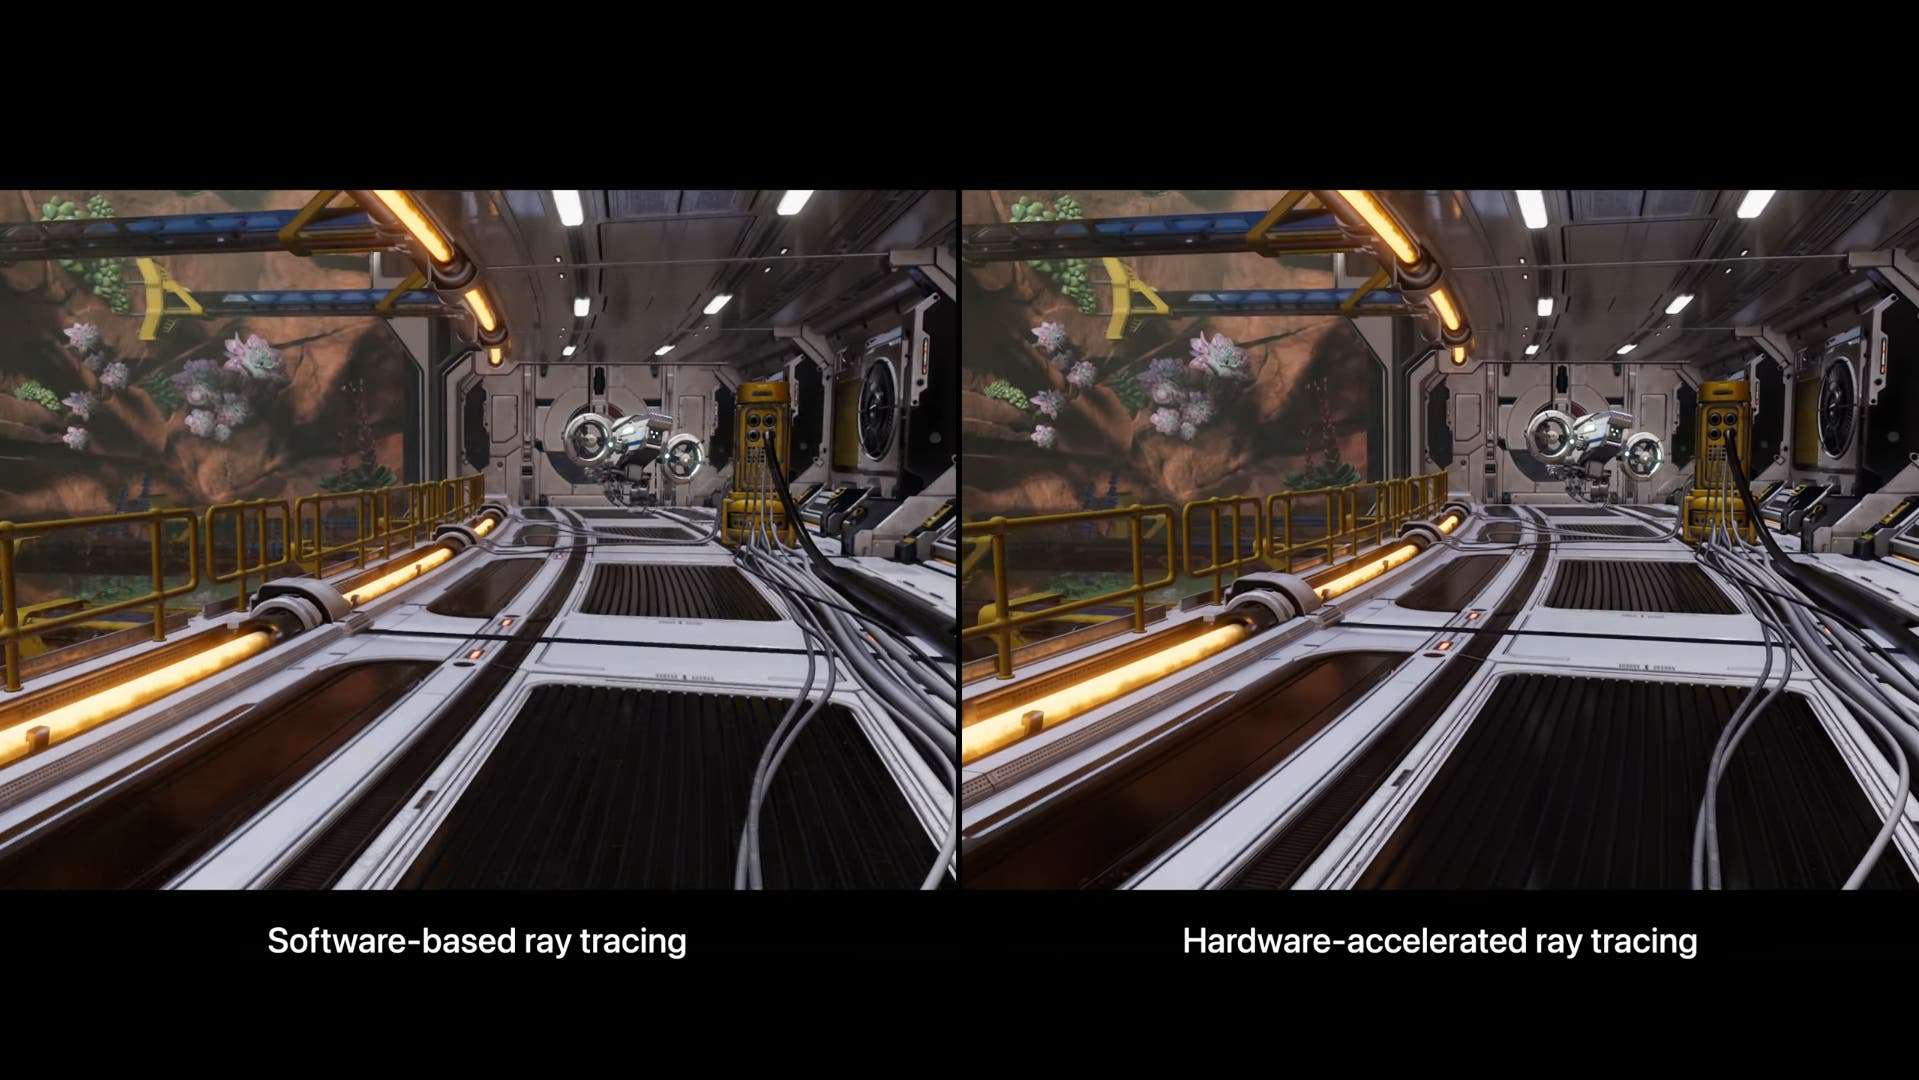 Hardware-accelerated Ray Tracing A17 Pro